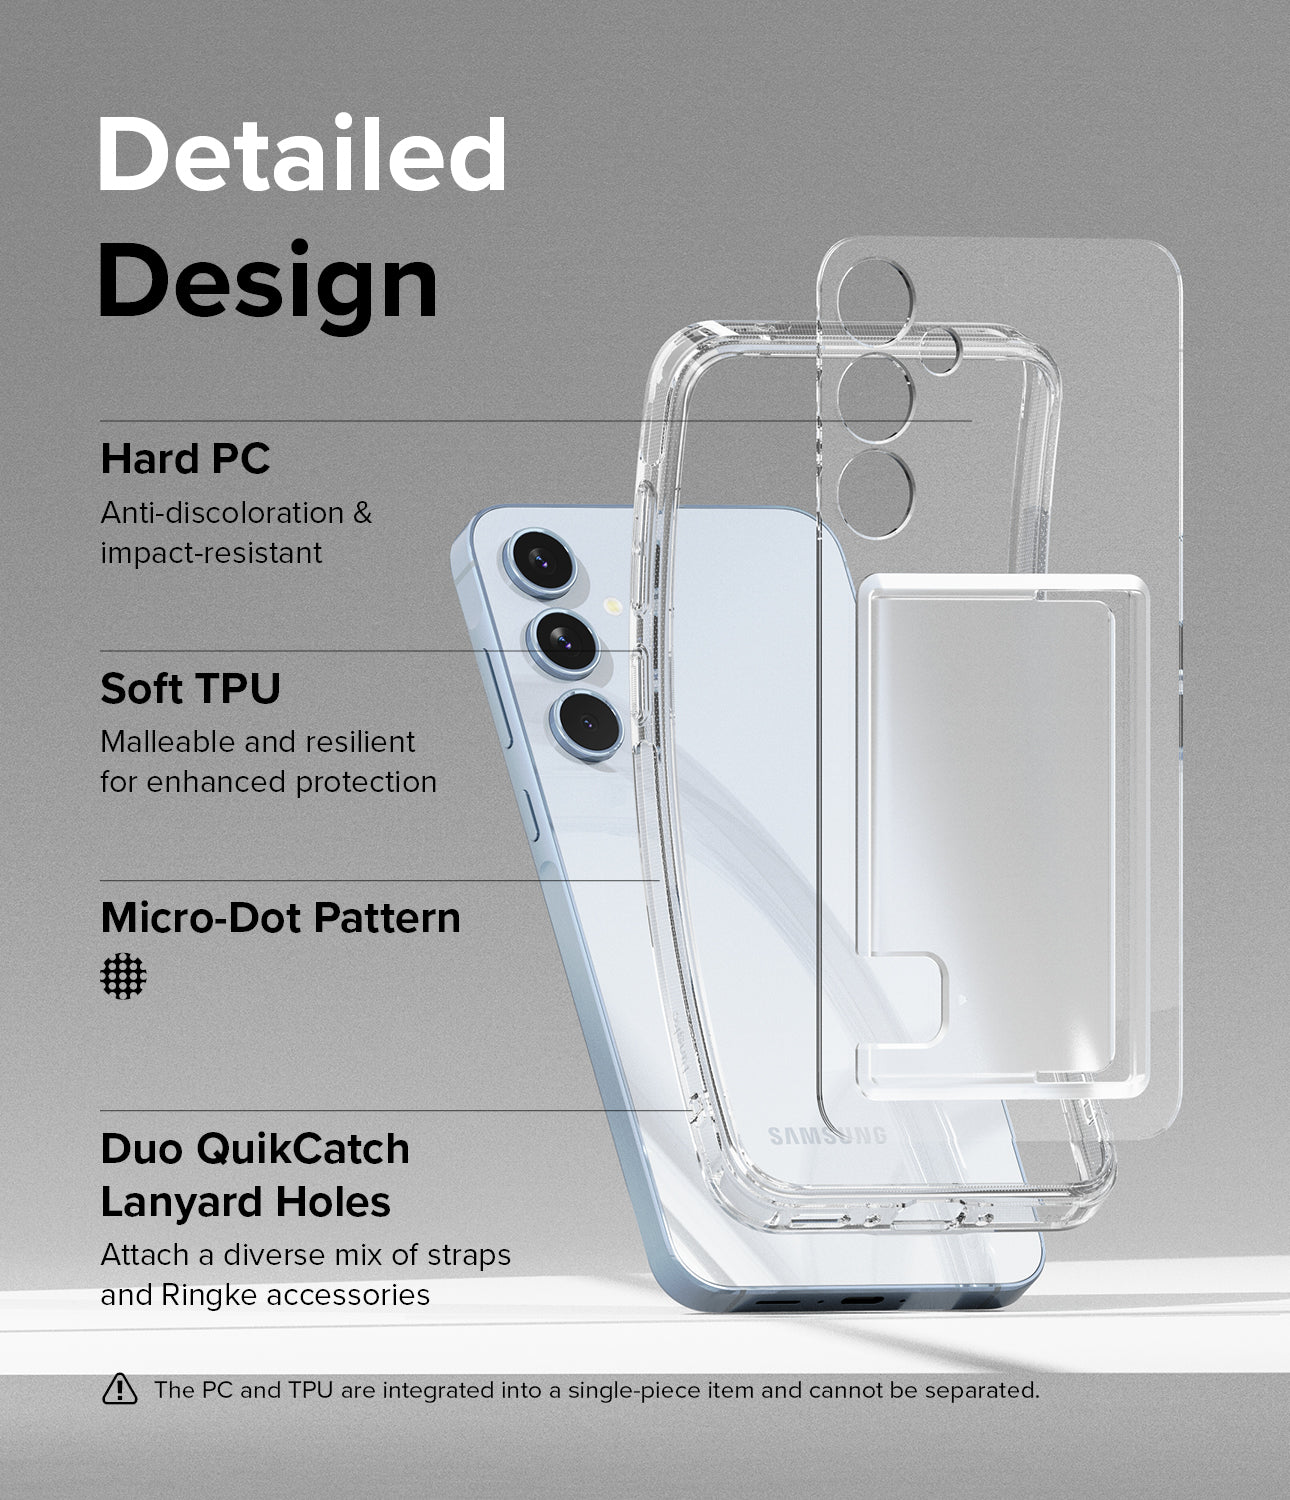 Galaxy A35 Case | Fusion Card - Detailed Design. Anti-discoloration and impact-resistant with Hard PC. Malleable and resilient for enhanced protection with Soft TPU. Micro-Dot Pattern. Duo QuikCatch Lanyard Holes to attach a diverse mix of straps and Ringke accessories.